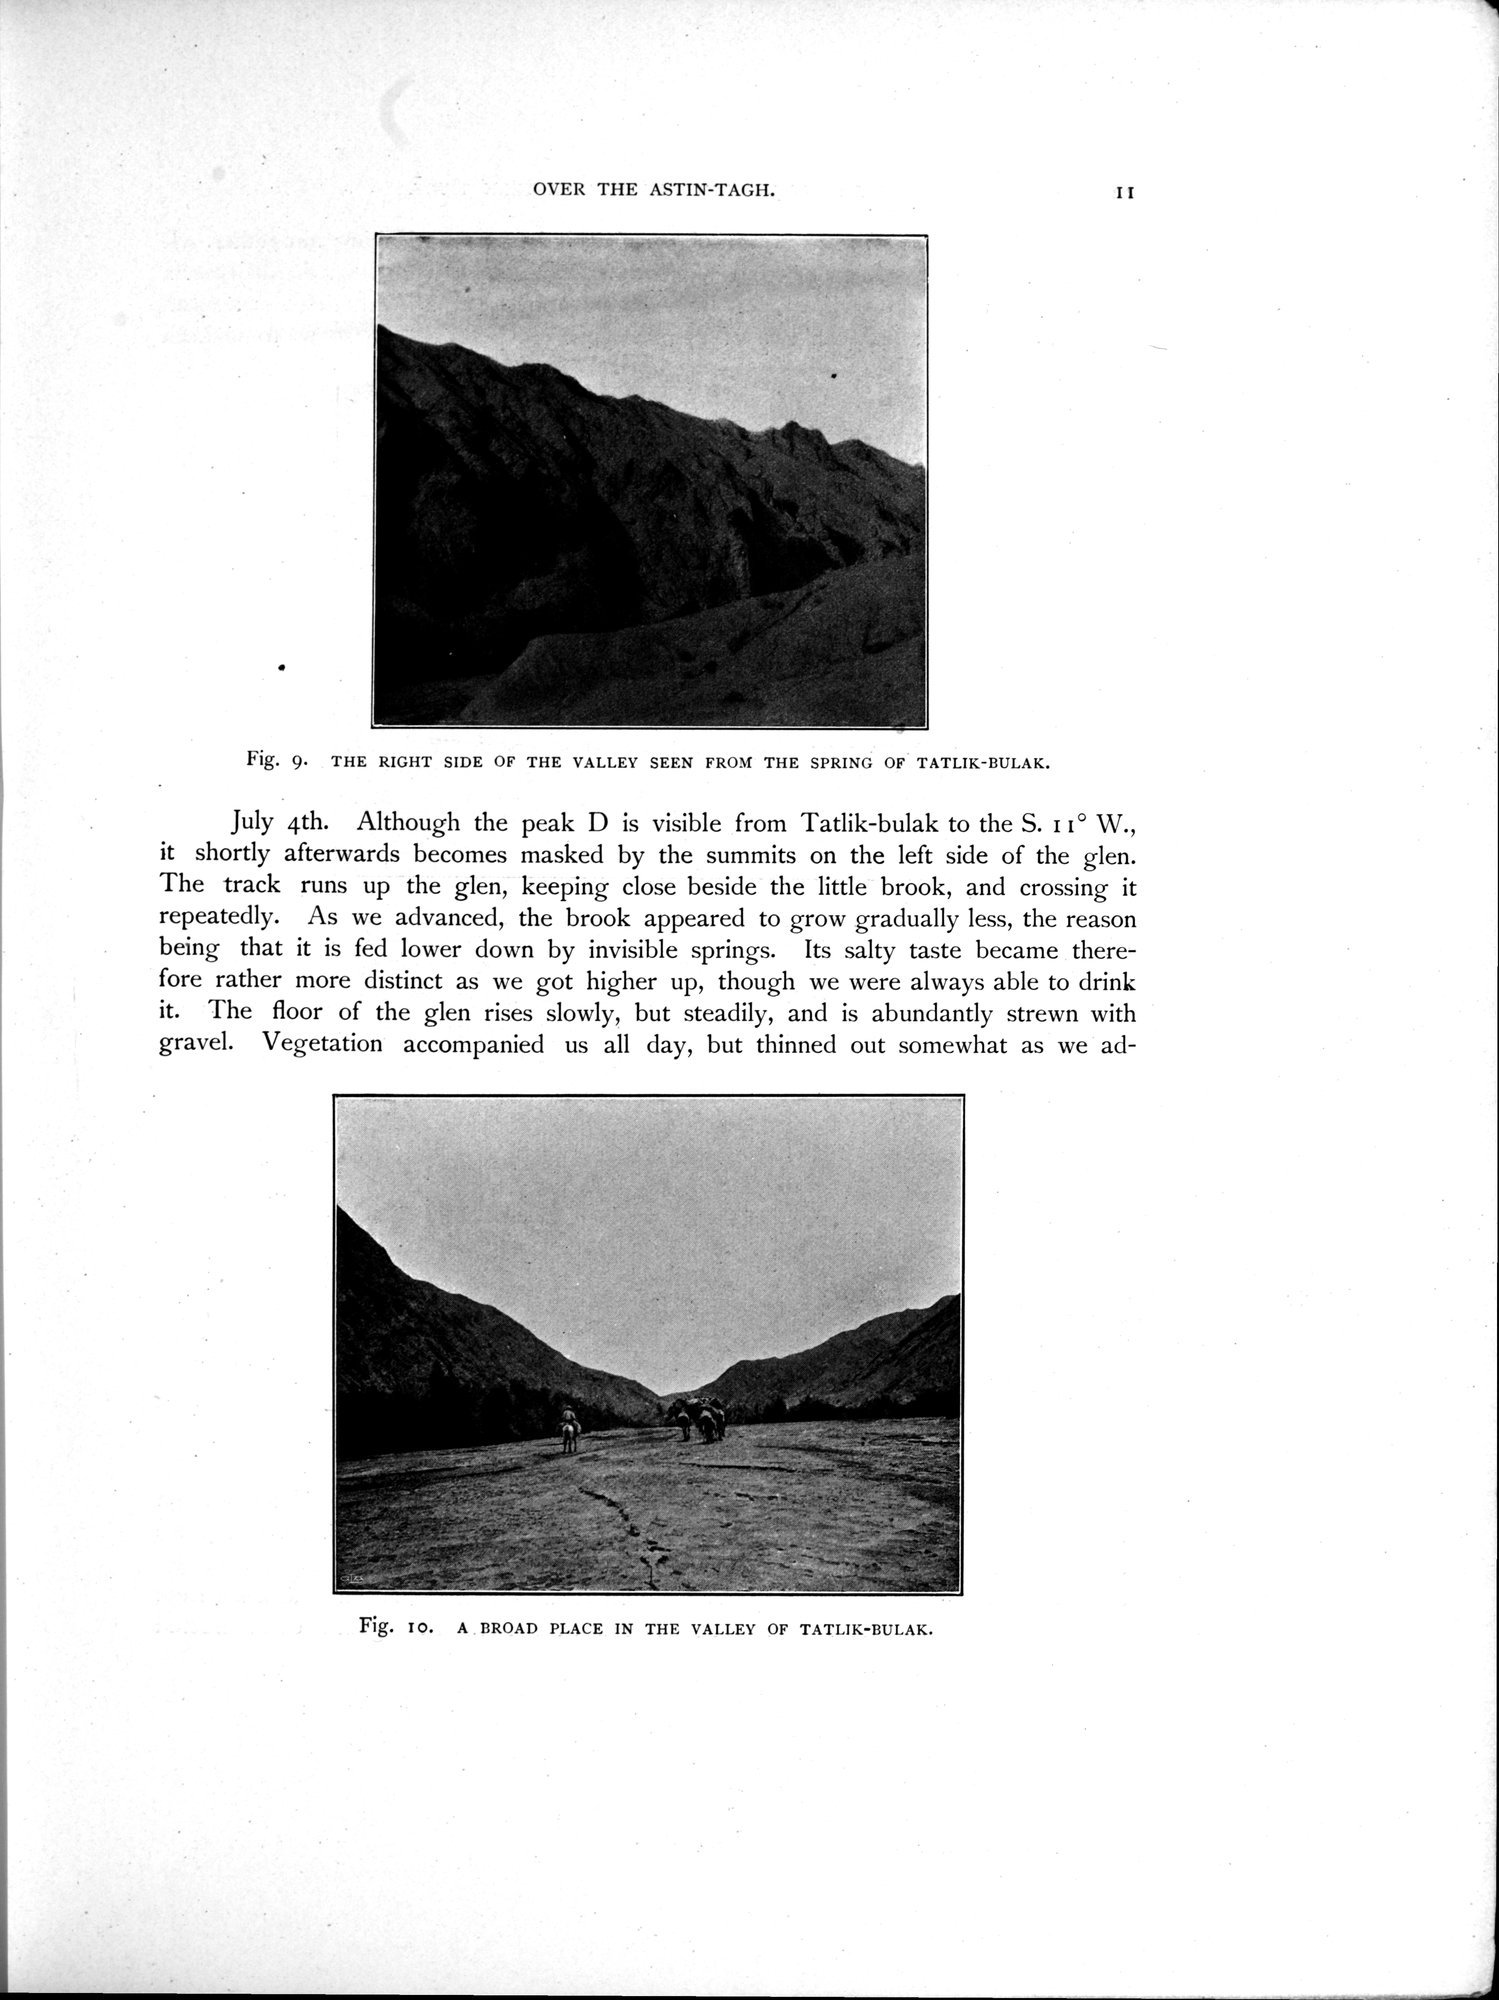 Scientific Results of a Journey in Central Asia, 1899-1902 : vol.3 / 23 ページ（白黒高解像度画像）